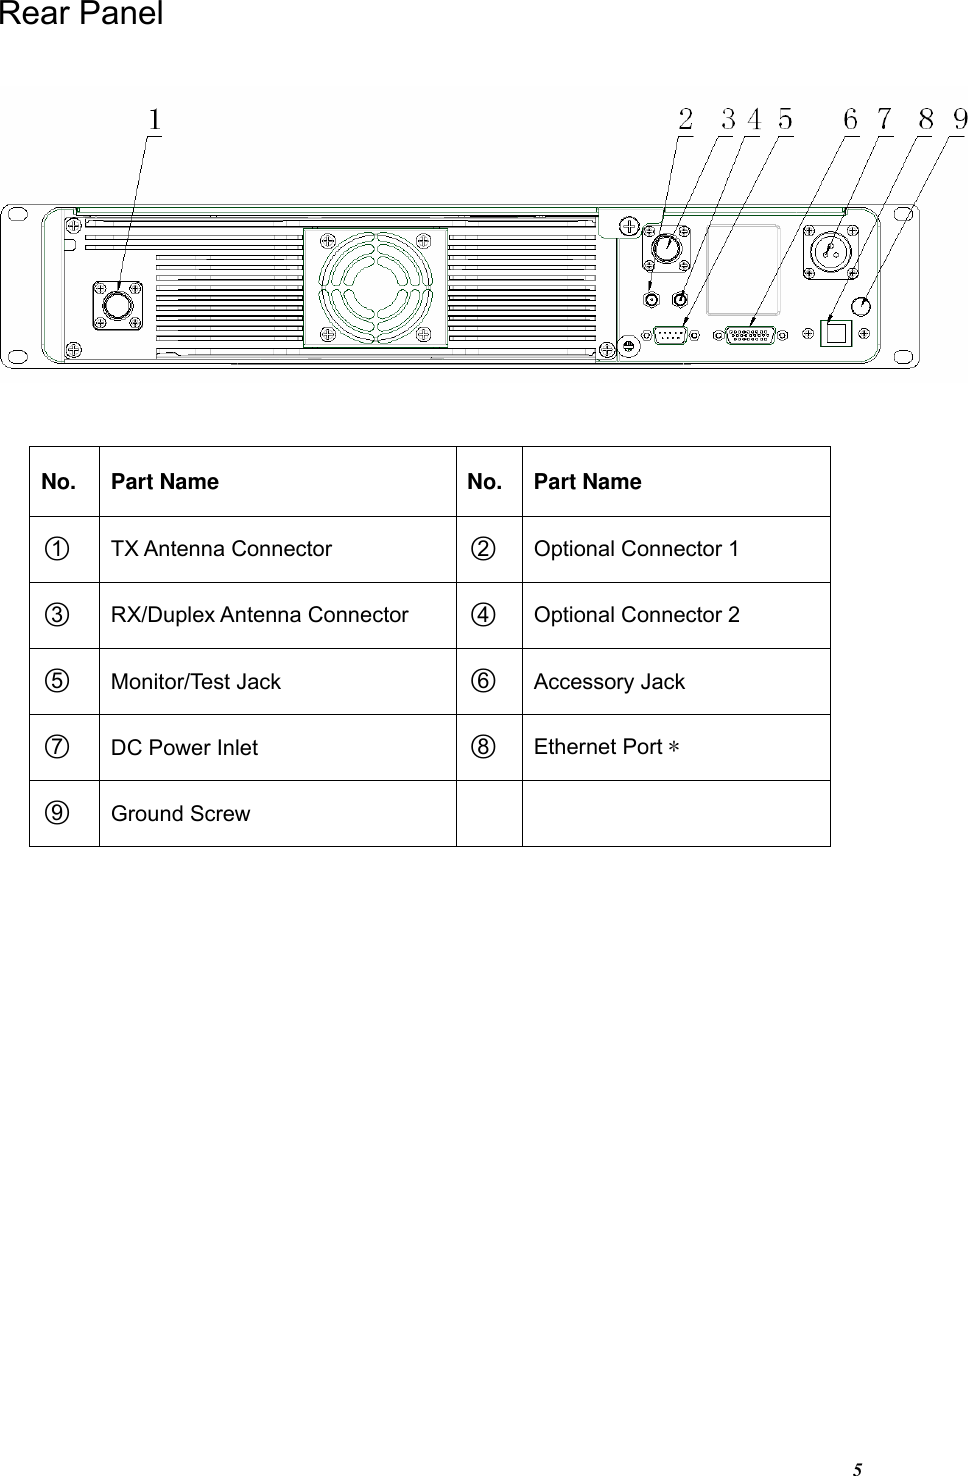 5Rear Panel No. Part Name No. Part Name ○1 TX Antenna Connector  ○2 Optional Connector 1 ○3 RX/Duplex Antenna Connector  ○4 Optional Connector 2 ○5  Monitor/Test Jack  ○6  Accessory Jack ○7  DC Power Inlet  ○8  Ethernet Port * ○9  Ground Screw 